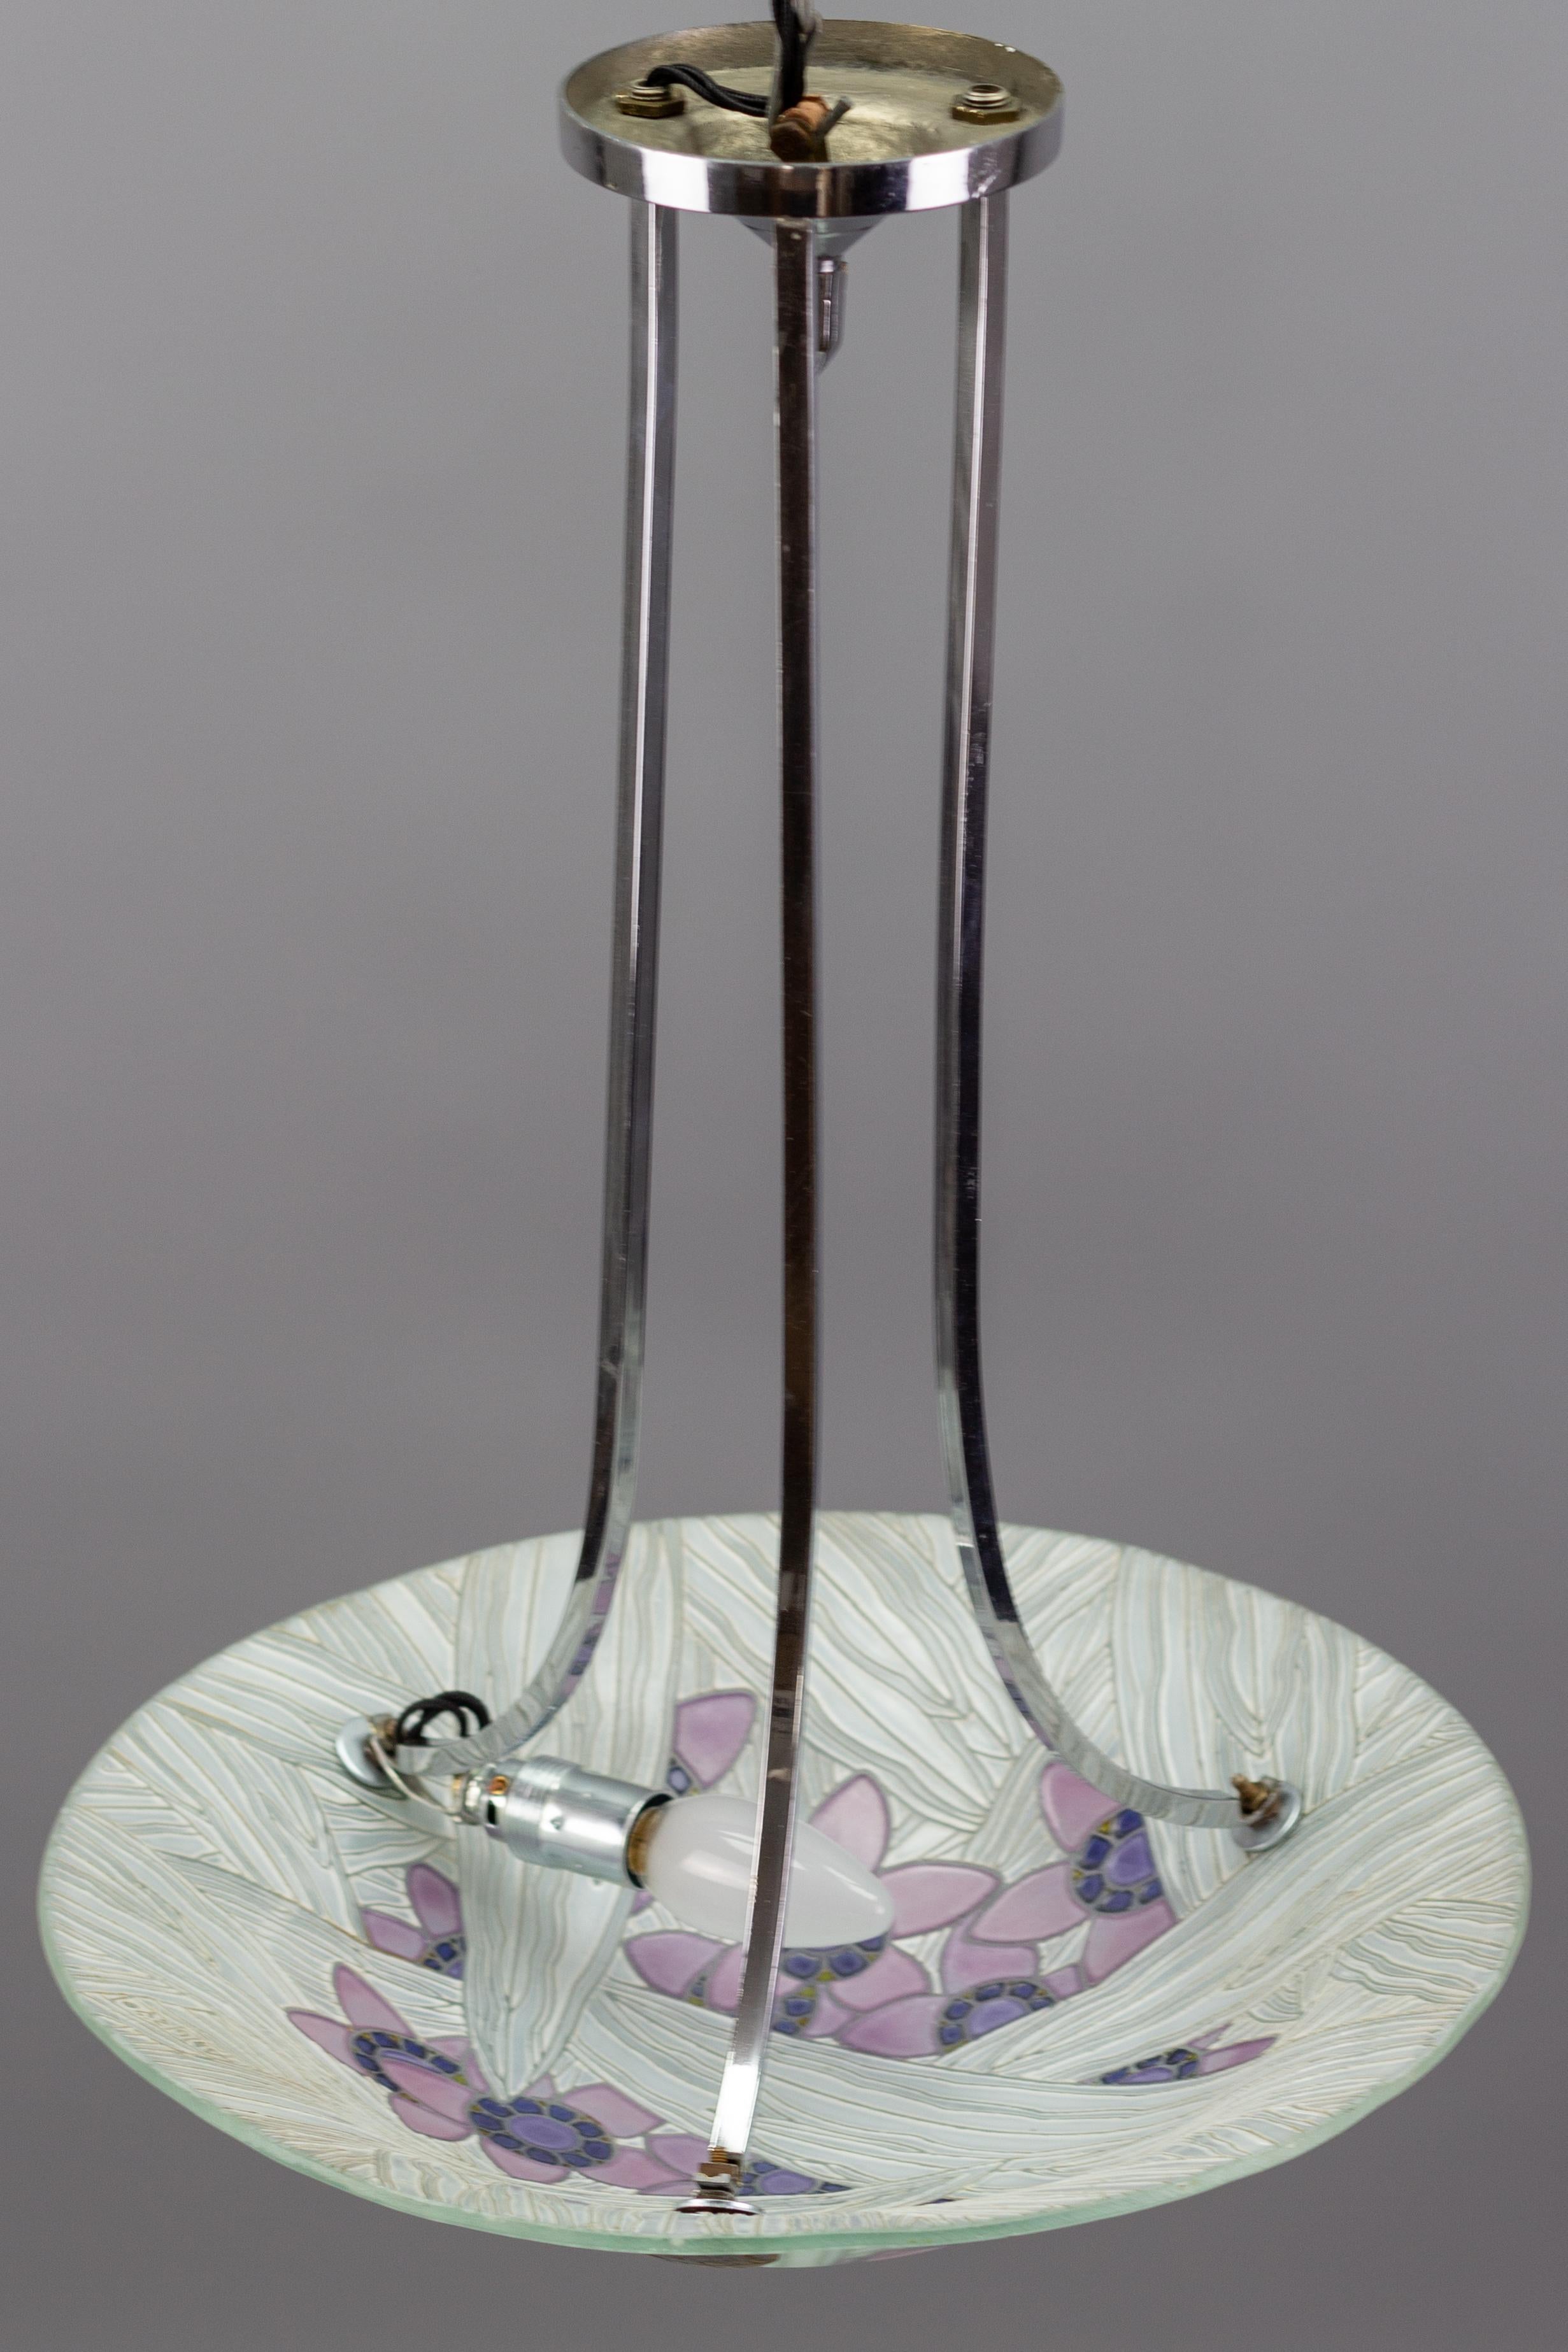 French Art Deco Loys Lucha Signed Floral Glass and Chrome Pendant Light, 1930s For Sale 3